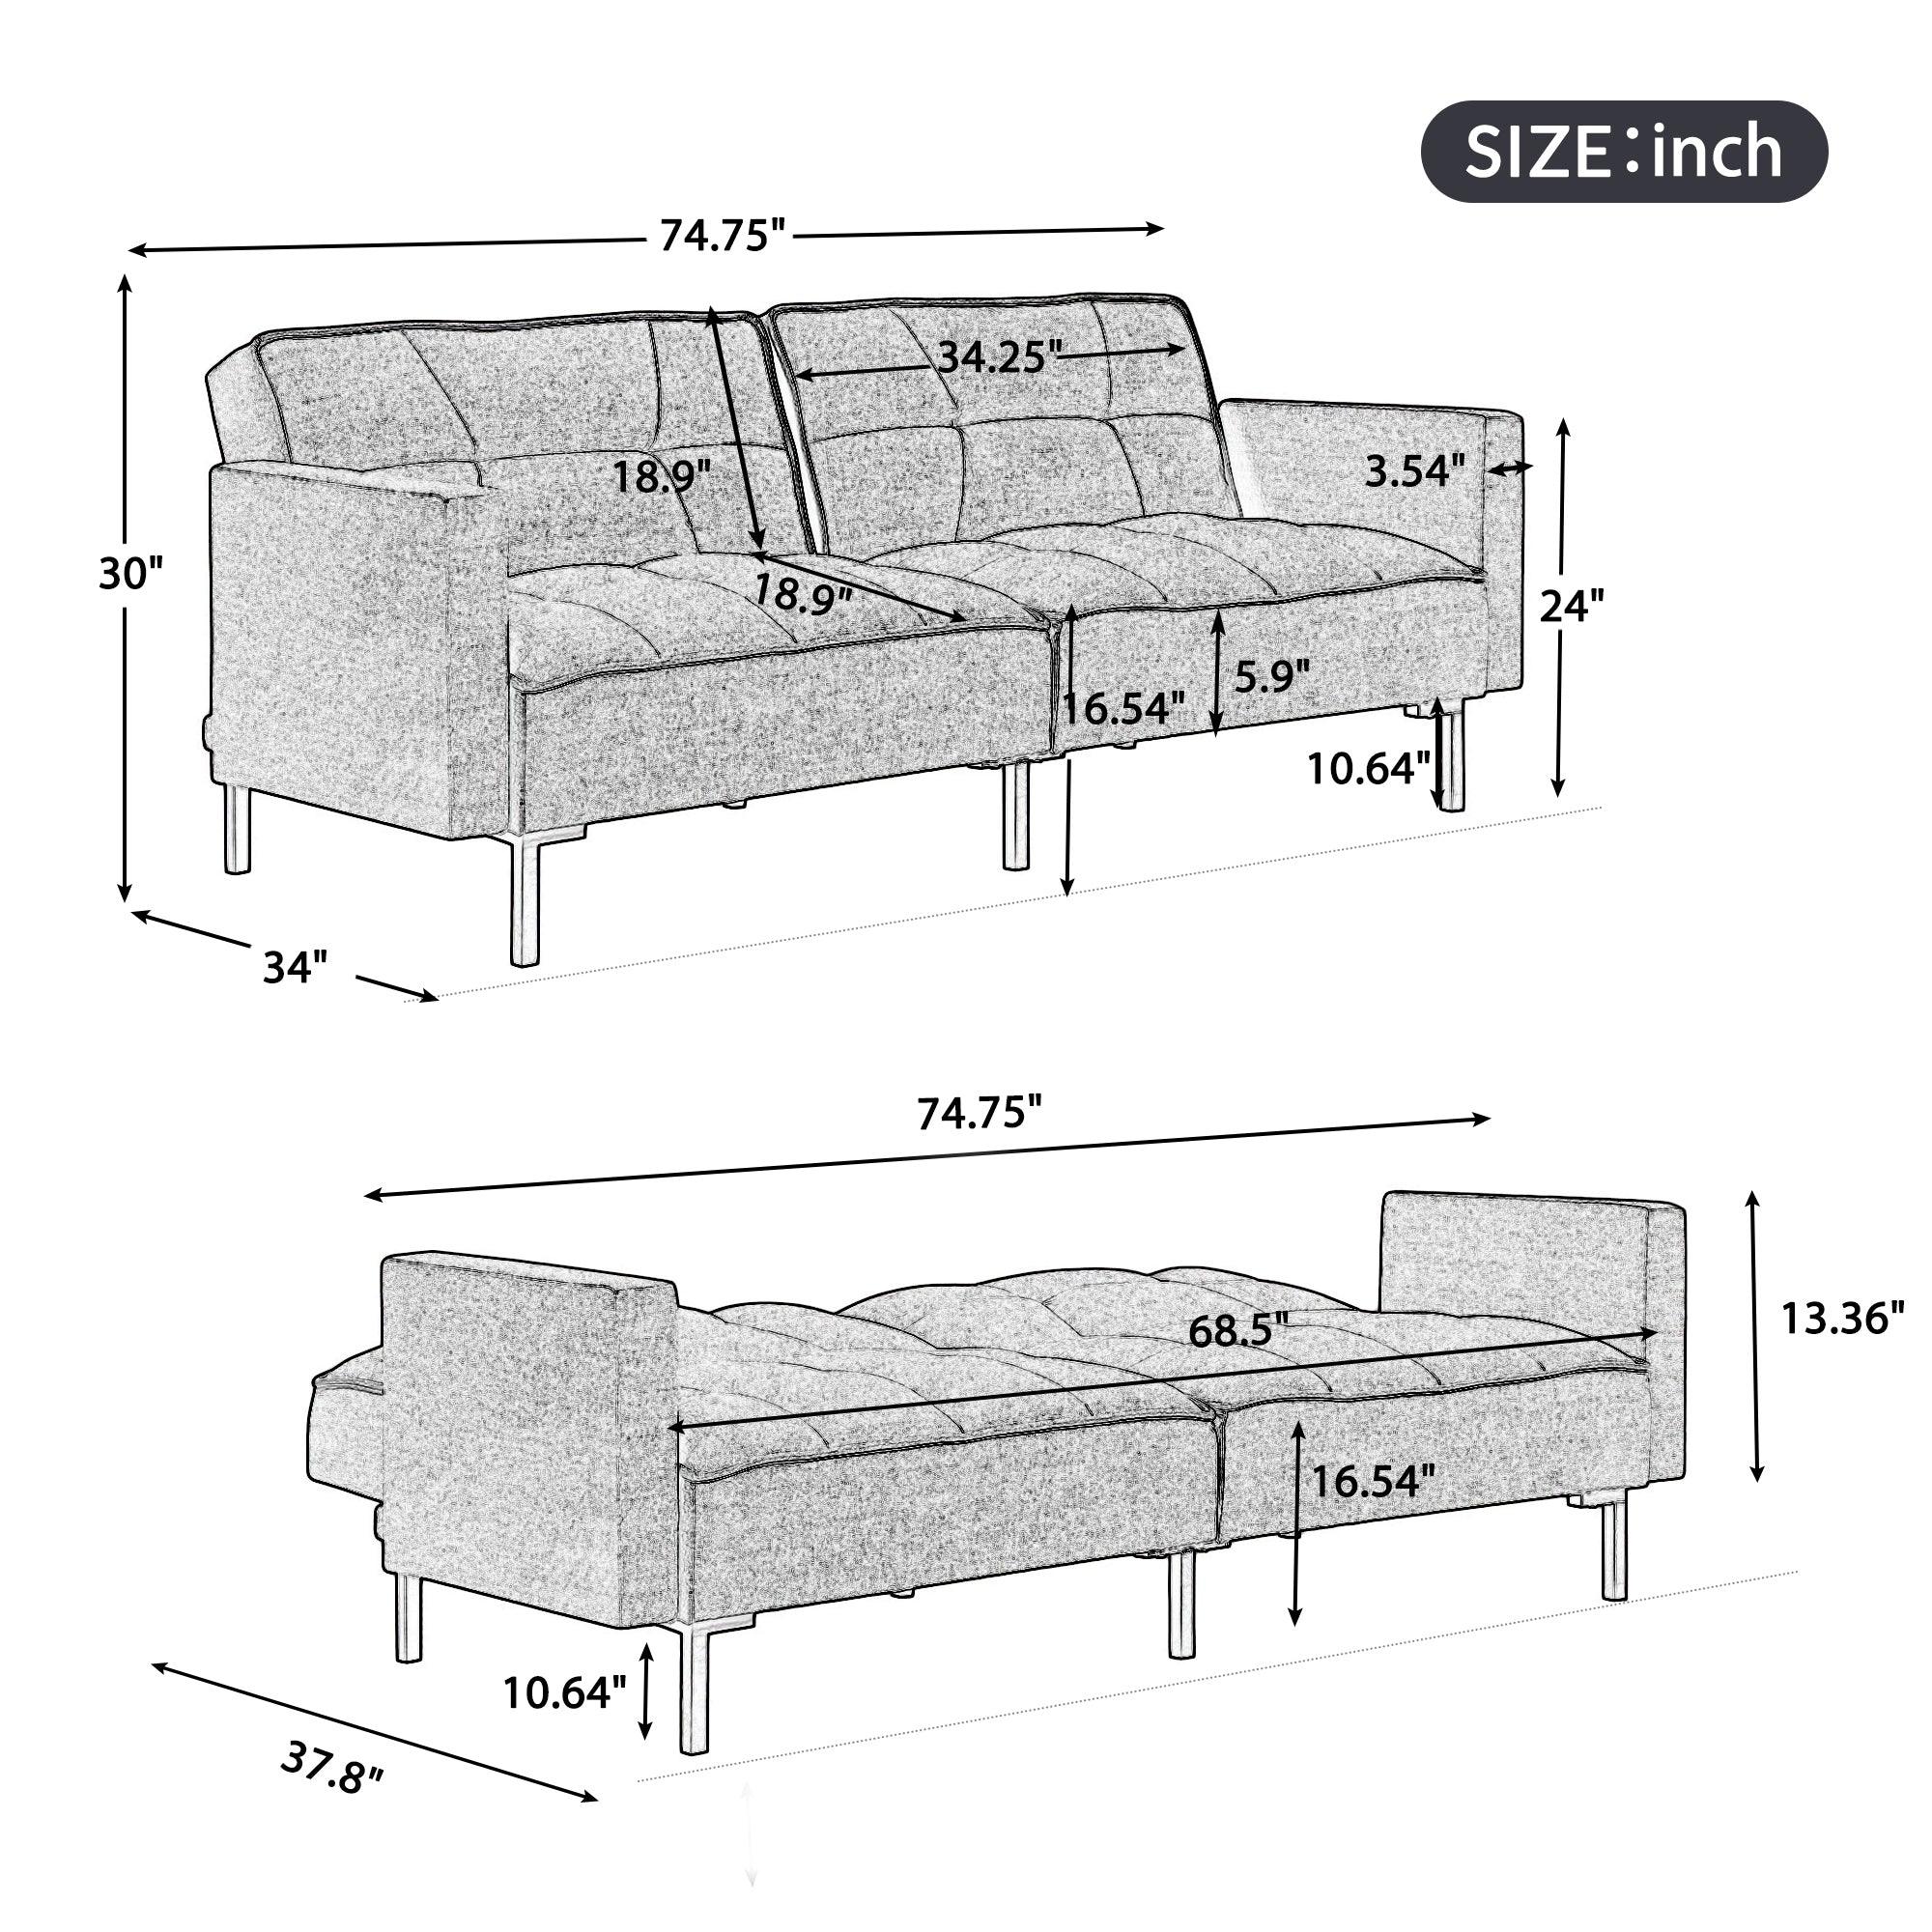 74.8"  Linen Upholstered Modern Convertible Folding Futon Sofa Bed For Compact Living Space, Apartment, Dorm